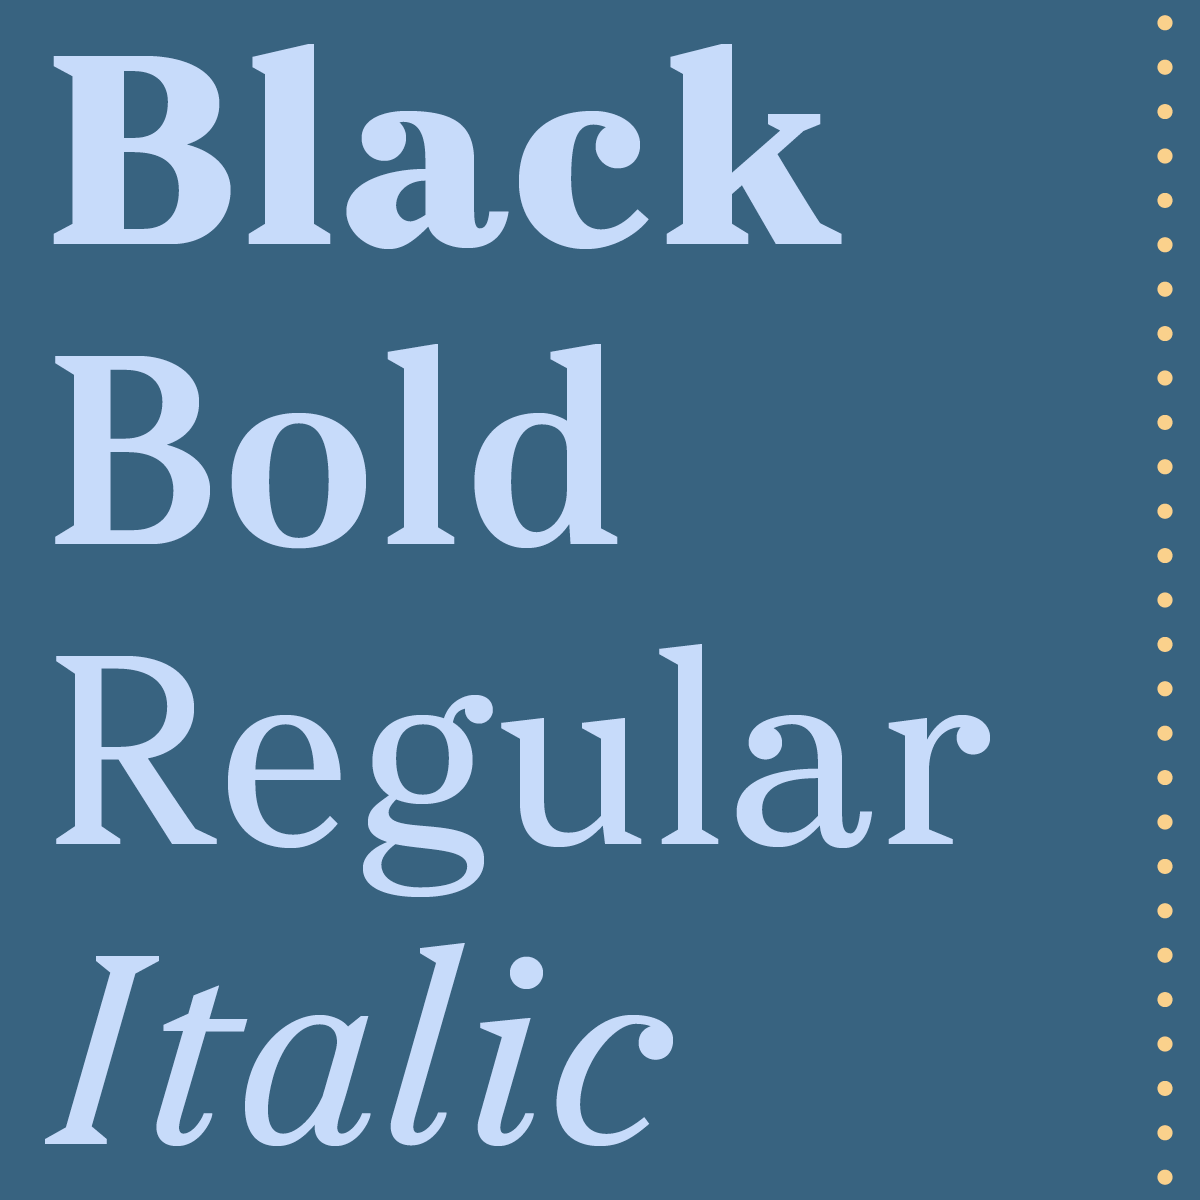 Styles Lady Somerset is available in: Black, Bold, Regular, and Italic